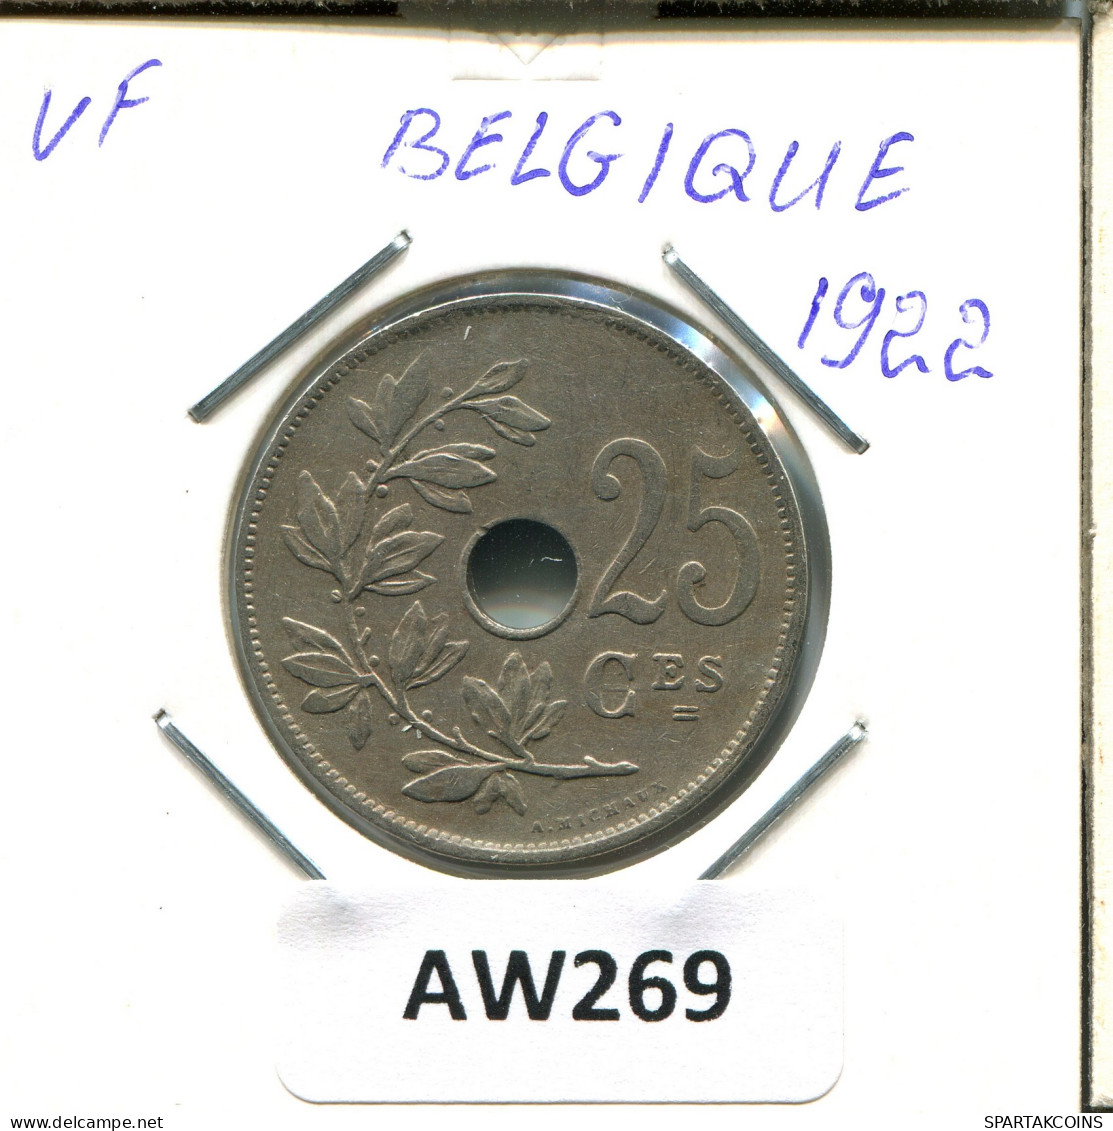 25 CENTIMES 1922 FRENCH Text BELGIUM Coin #AW269.U - 25 Centimes